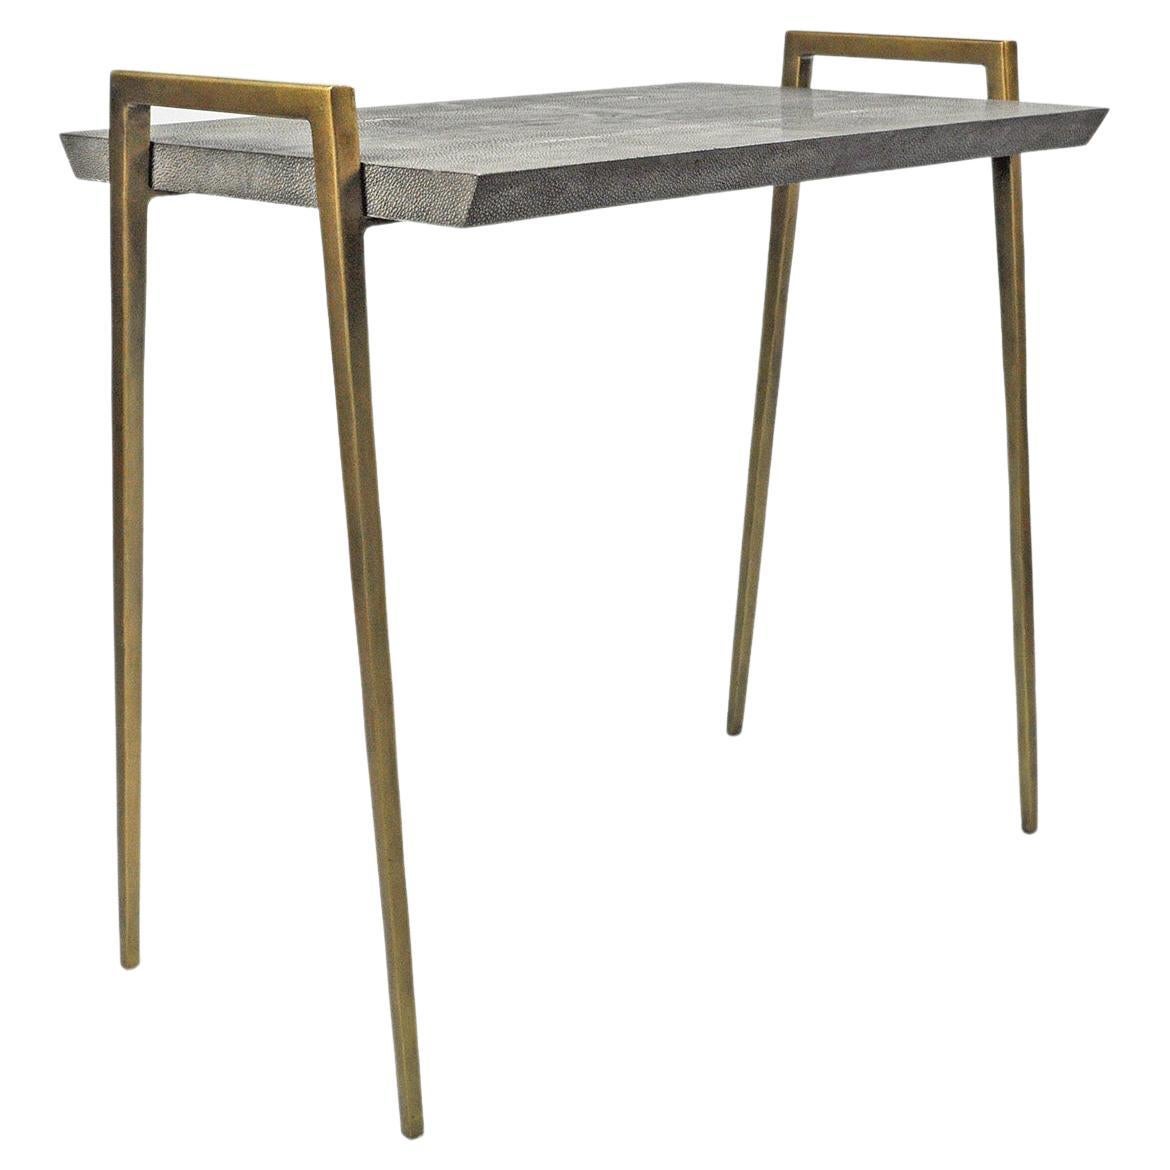 Side Table in Dark Grey Shagreen and Bronzed Metal Legs by Ginger Brown